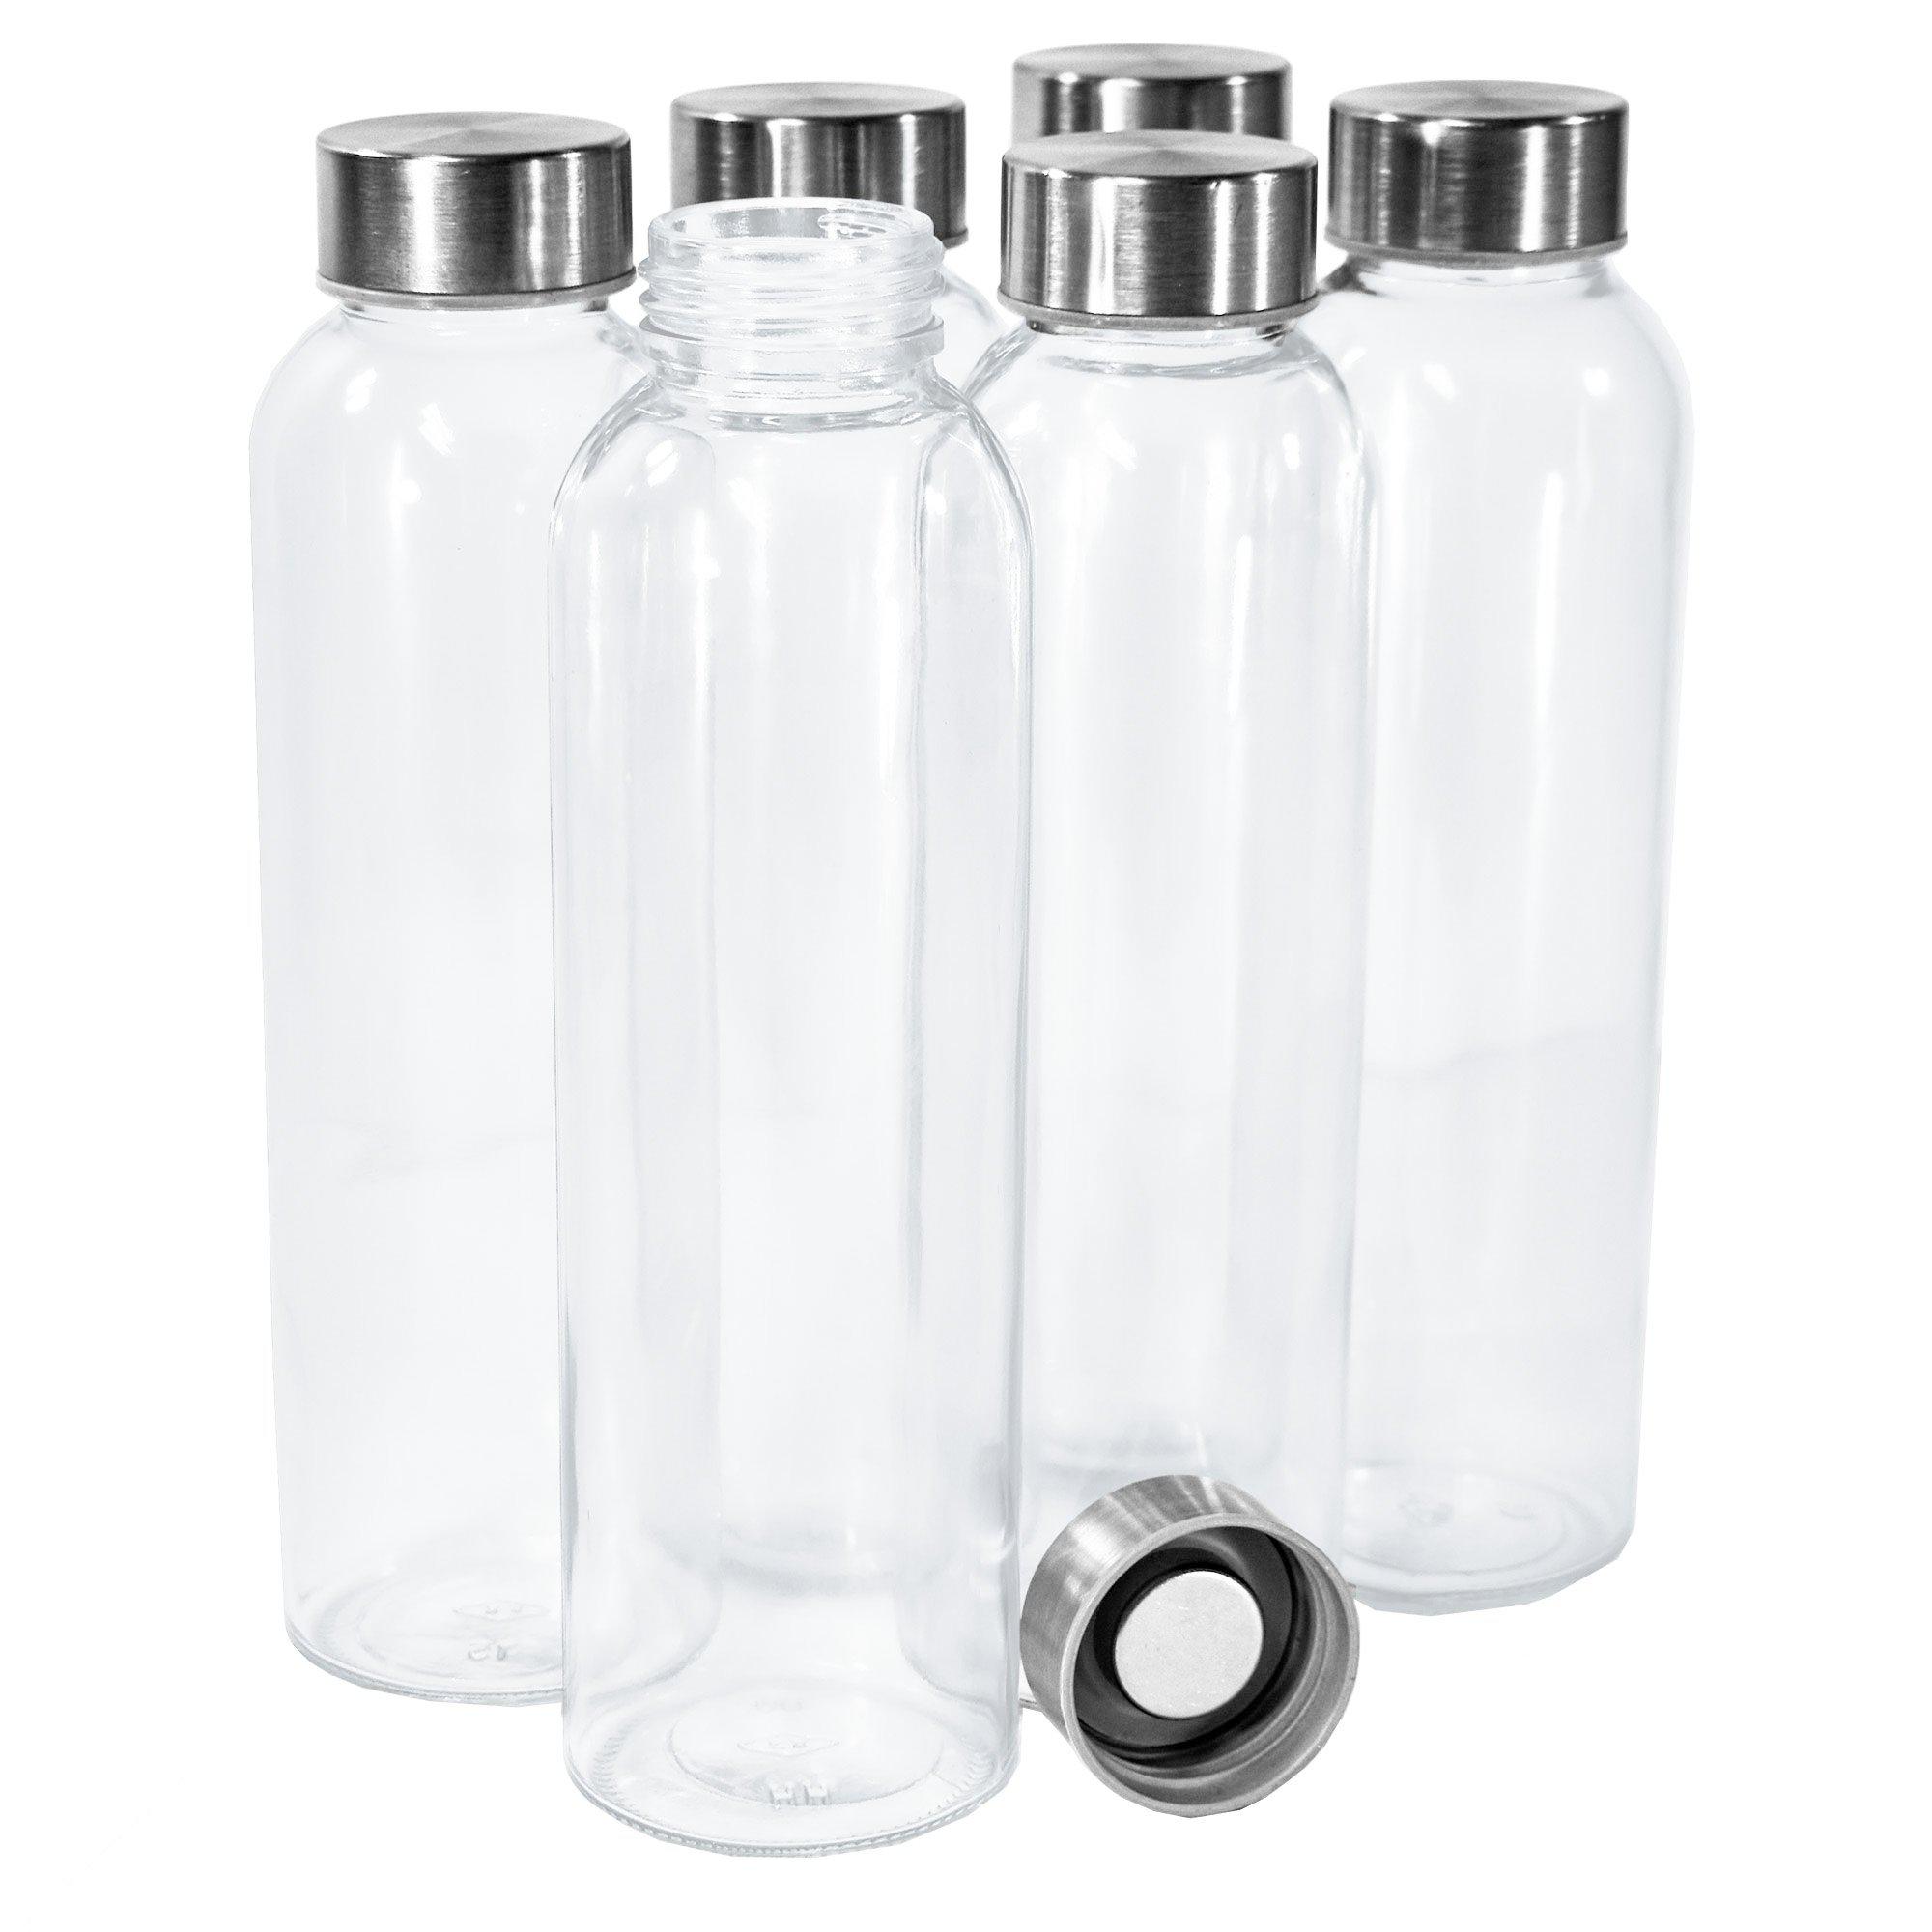 Wholesale glass water bottle for fridge to Store, Carry and Keep